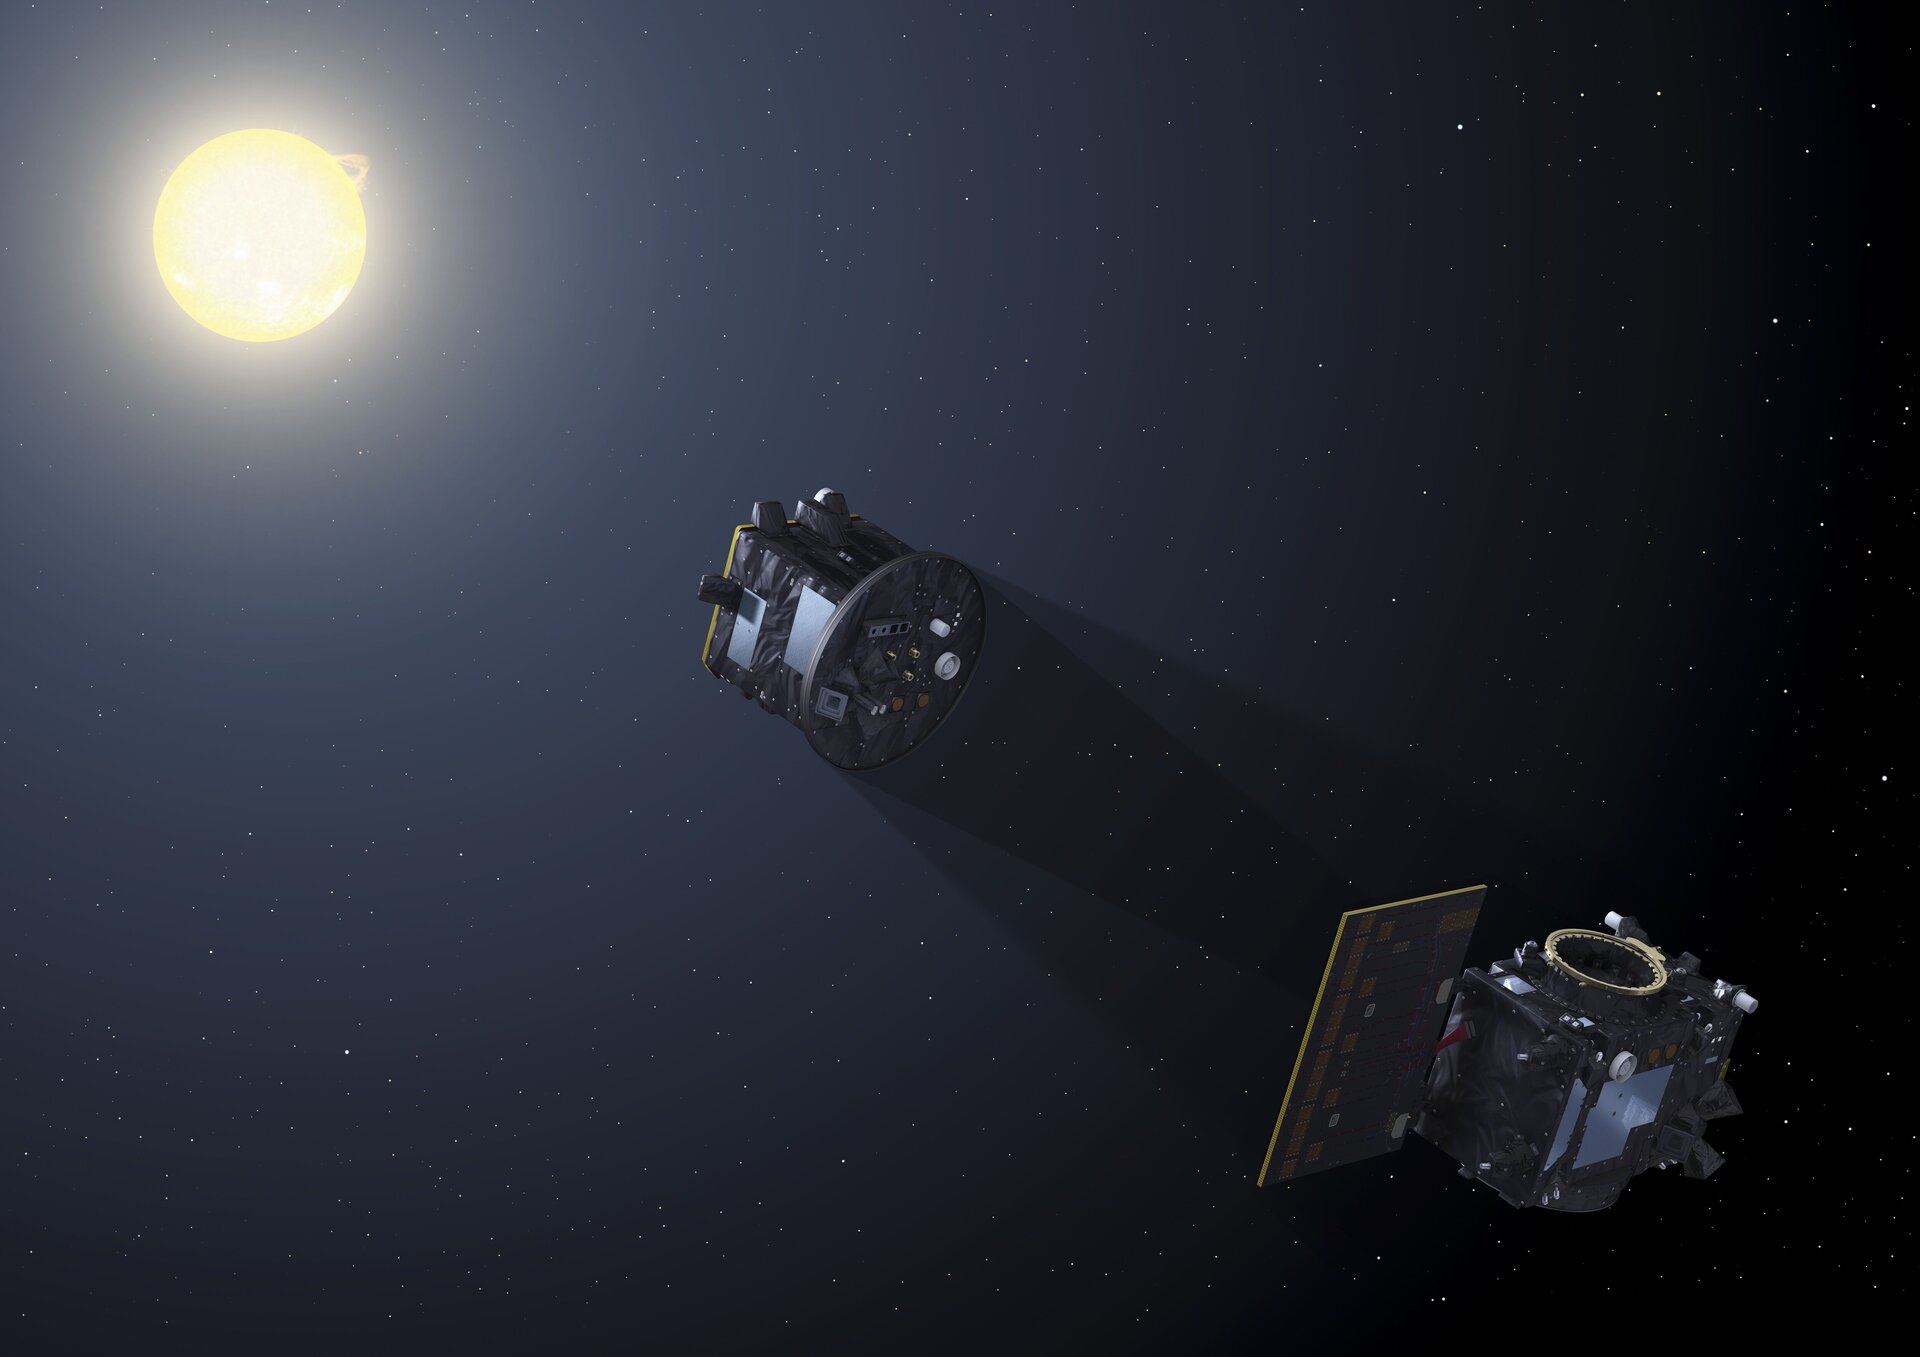 Artist's impression of ESA's Proba-3 mission blocking the Sun between two spacecraft